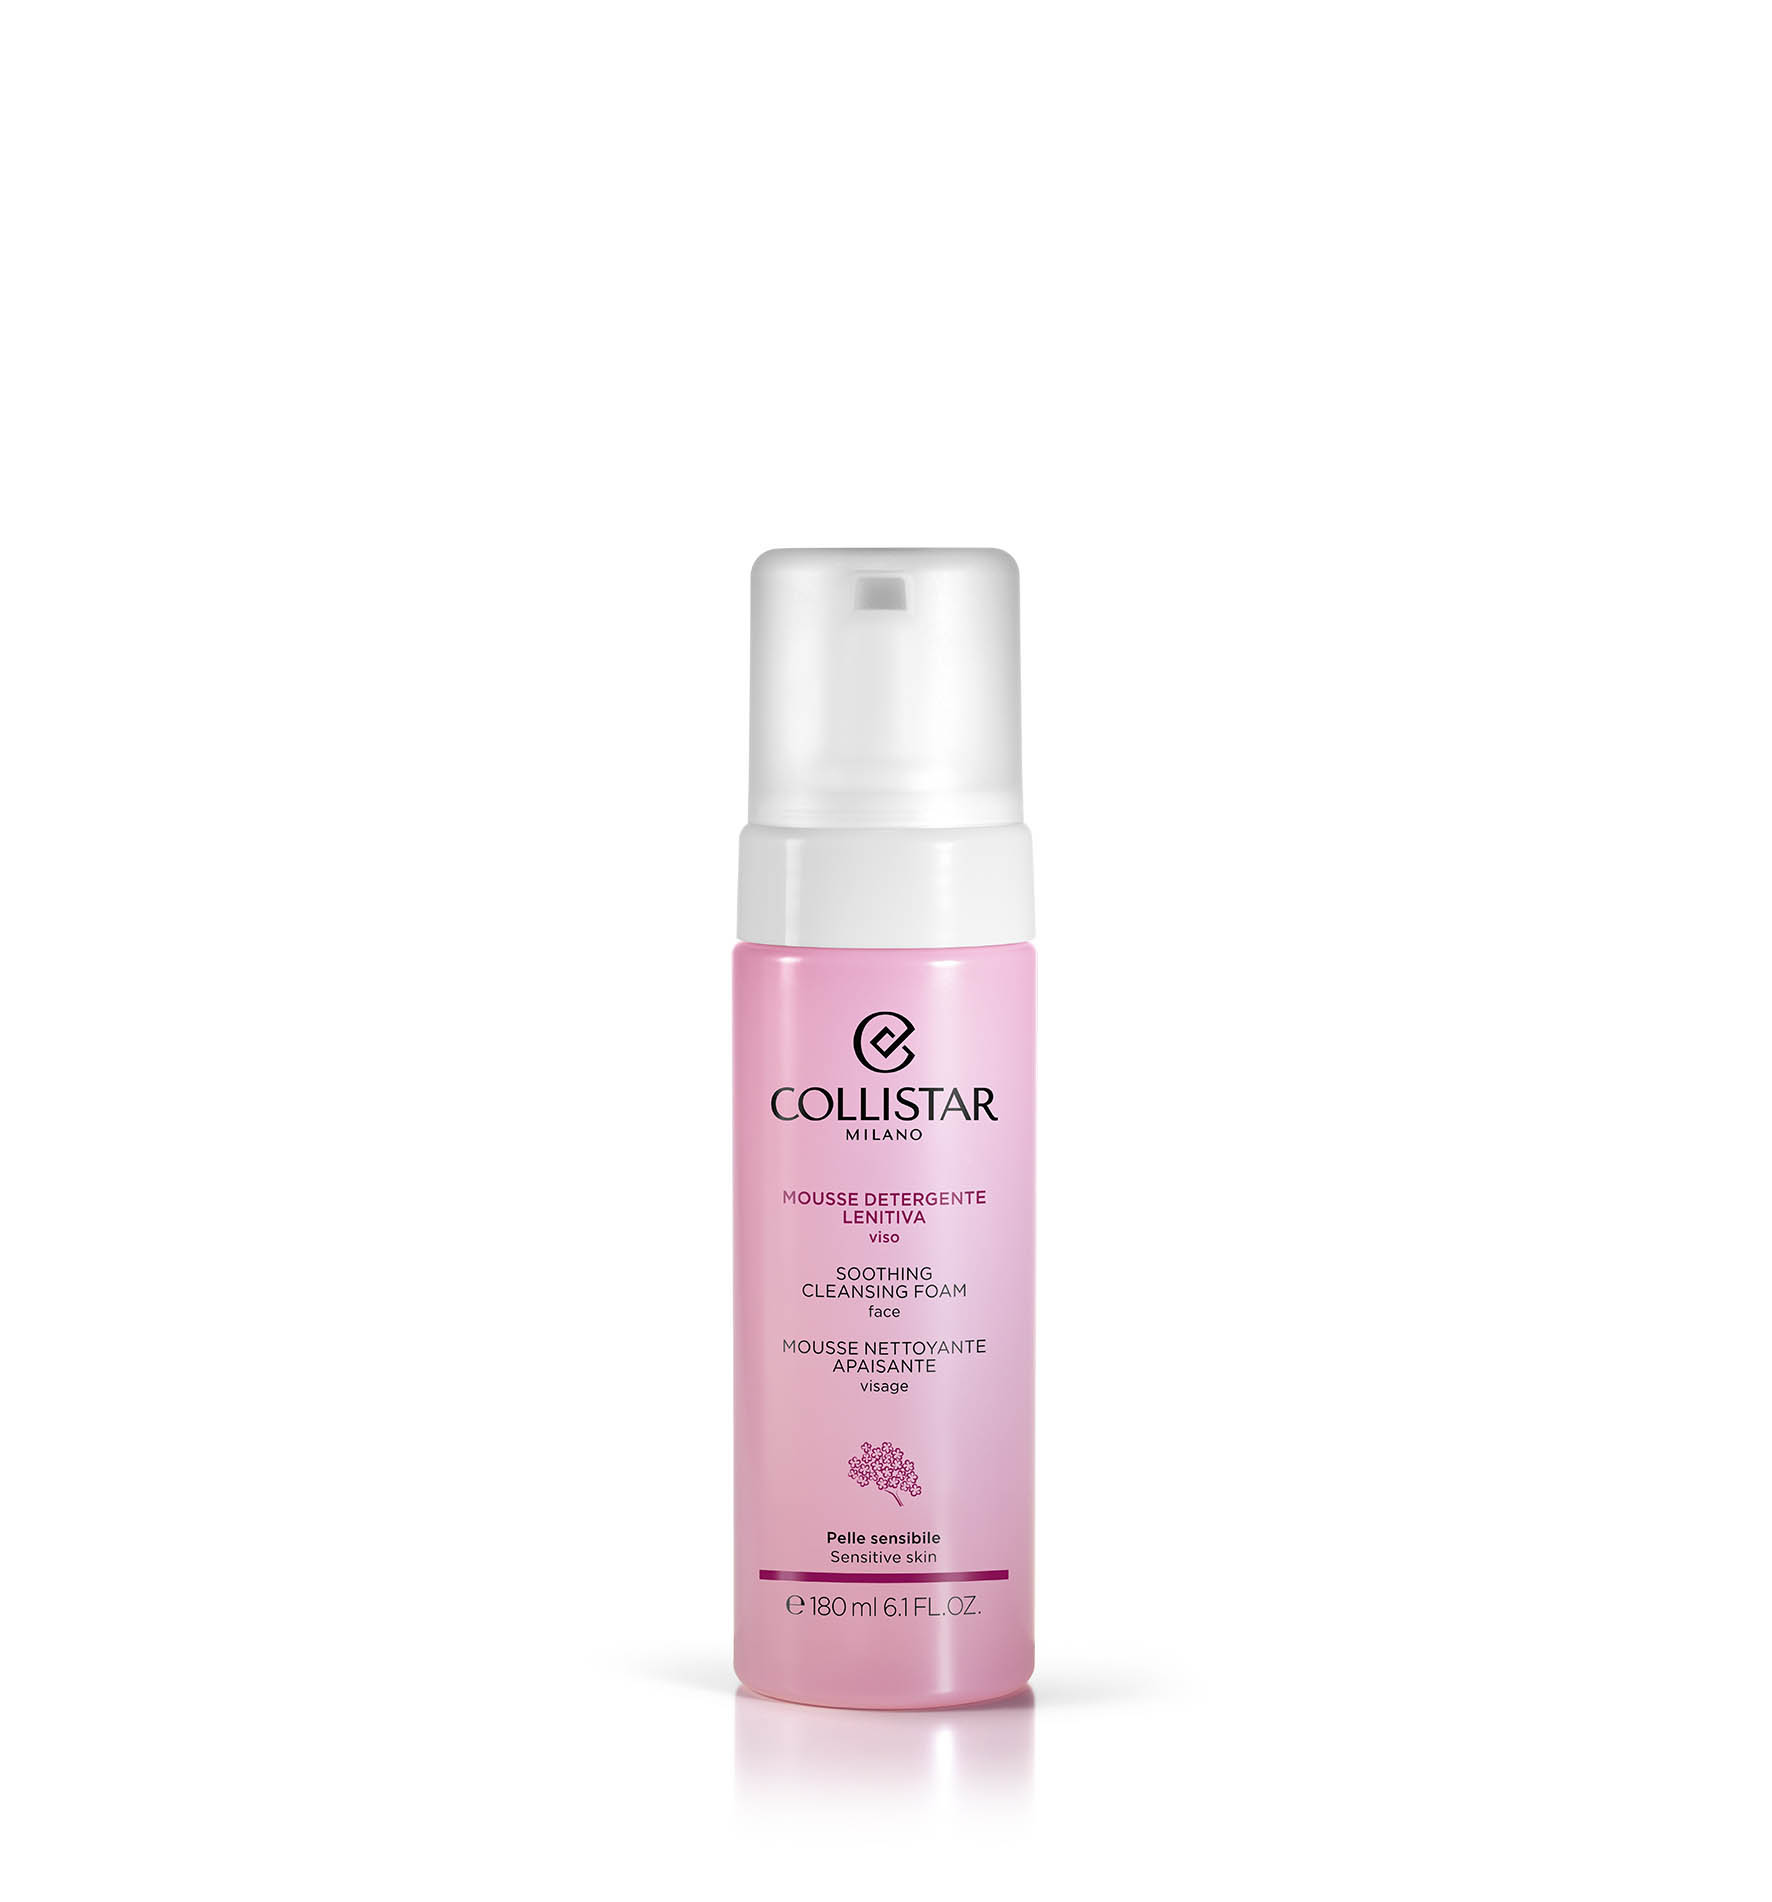 SOOTHING CLEANSING FOAM FACE - Sensitive skin | Collistar - Shop Online Ufficiale